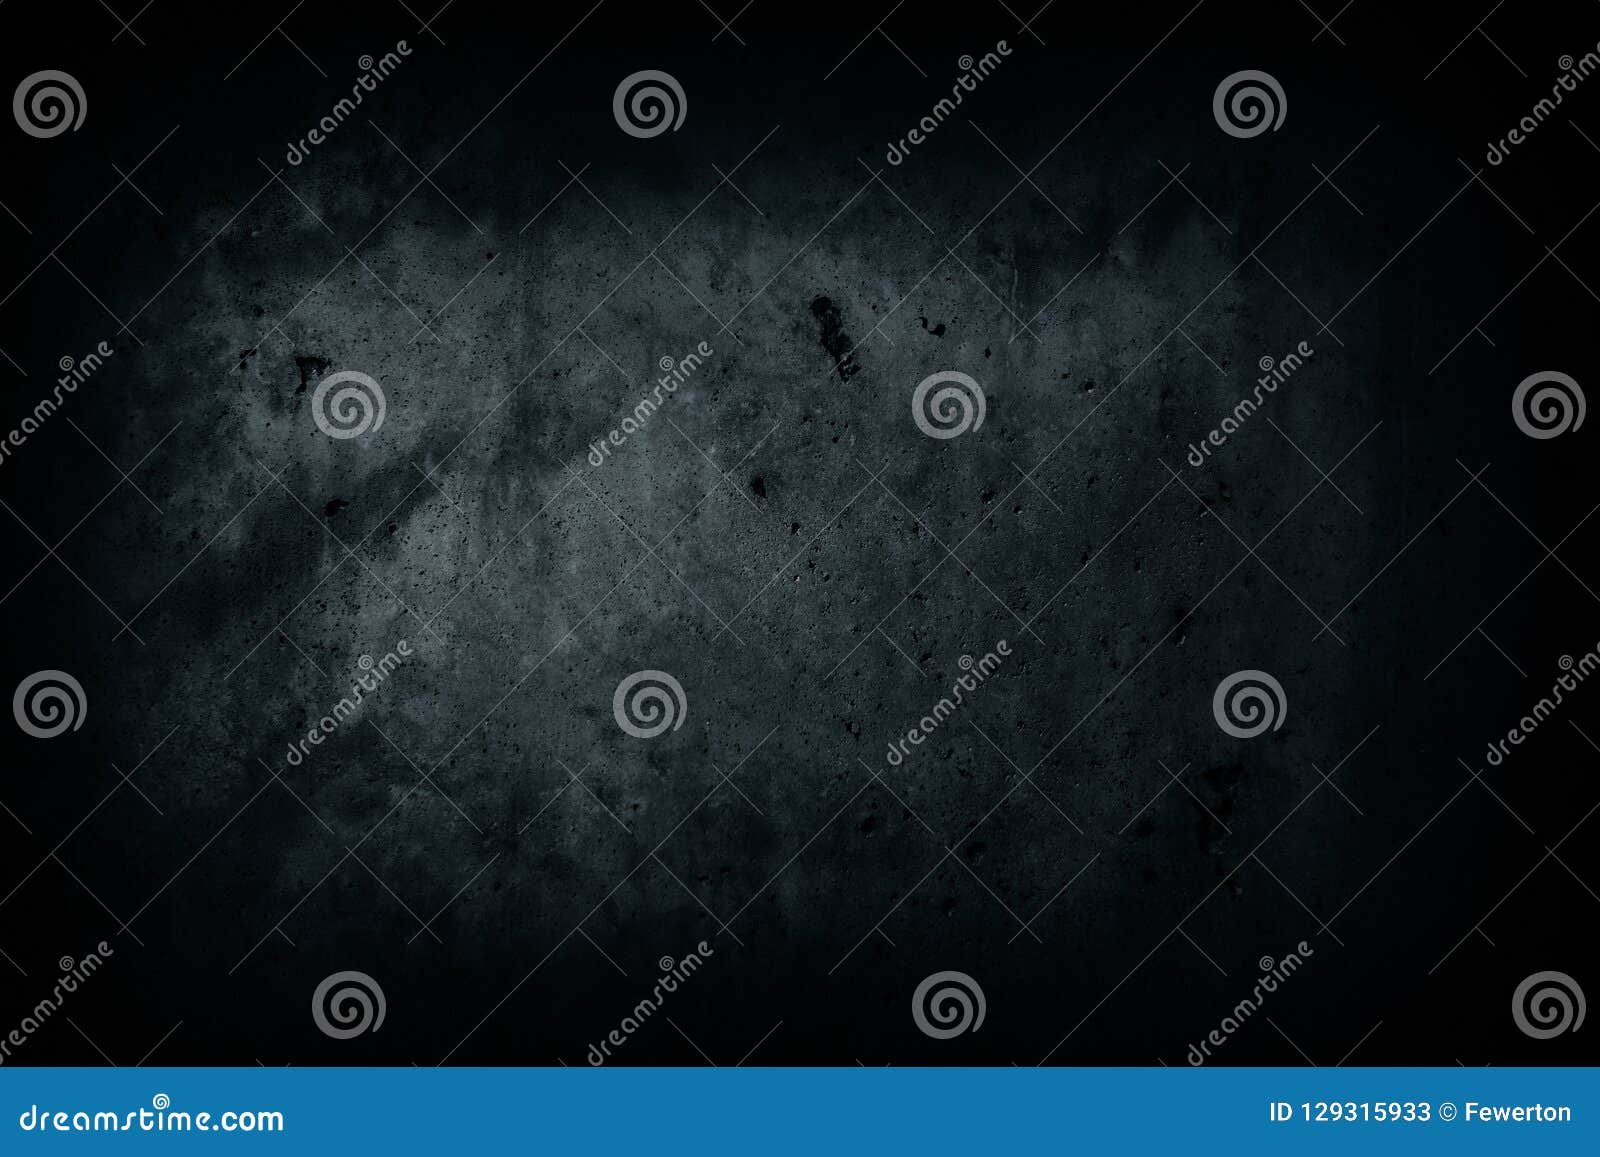 dark scary background. dark black concrete wall abandoned house with imperfections cement texture scary halloween background